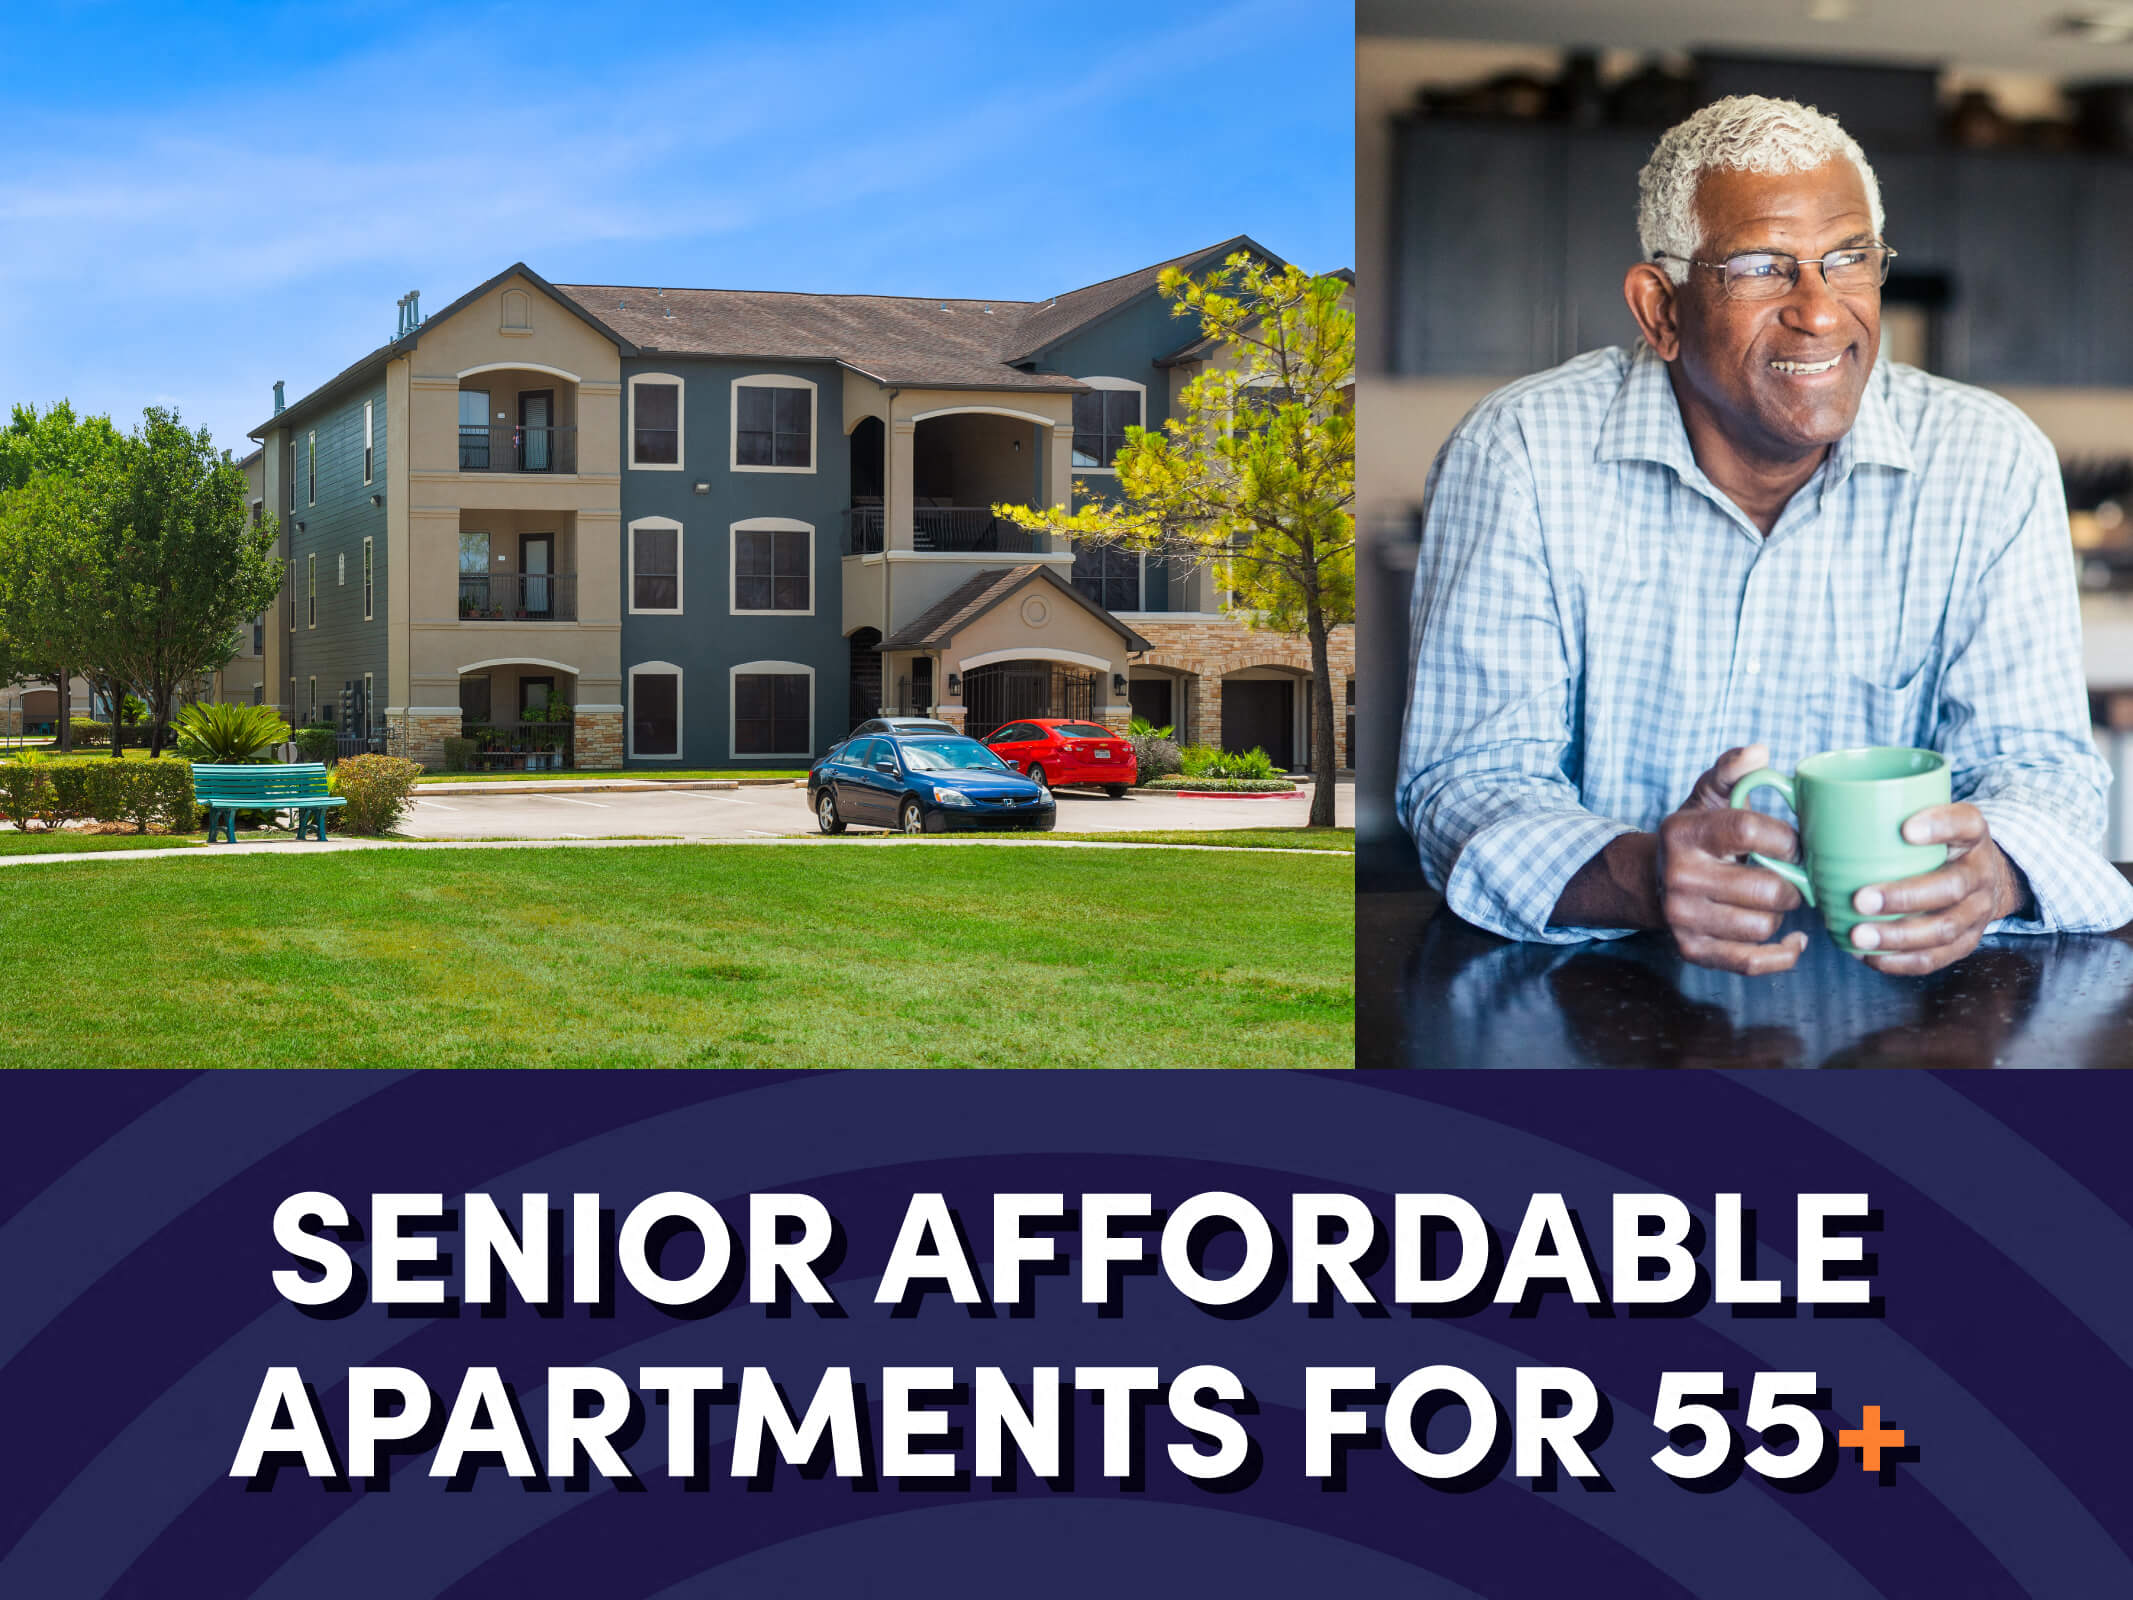 An image containing the exterior of the Parkway Senior Apartments in Pasadena, Texas, an elderly man, and text that says, “Senior Affordable Apartments for 55+”.